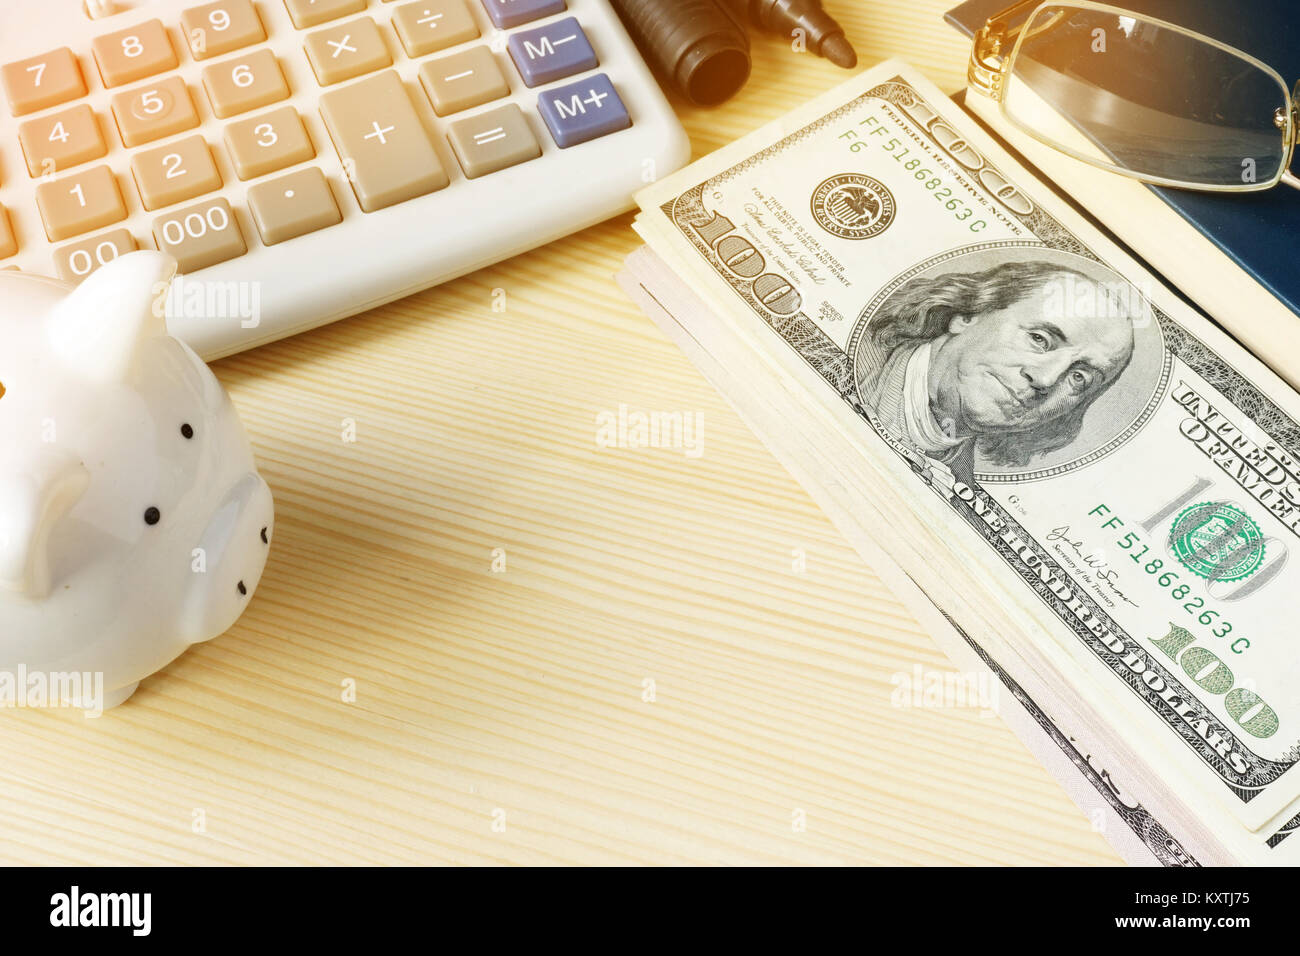 Office desk with money, piggy bank and accounting book. Small business concept. Stock Photo